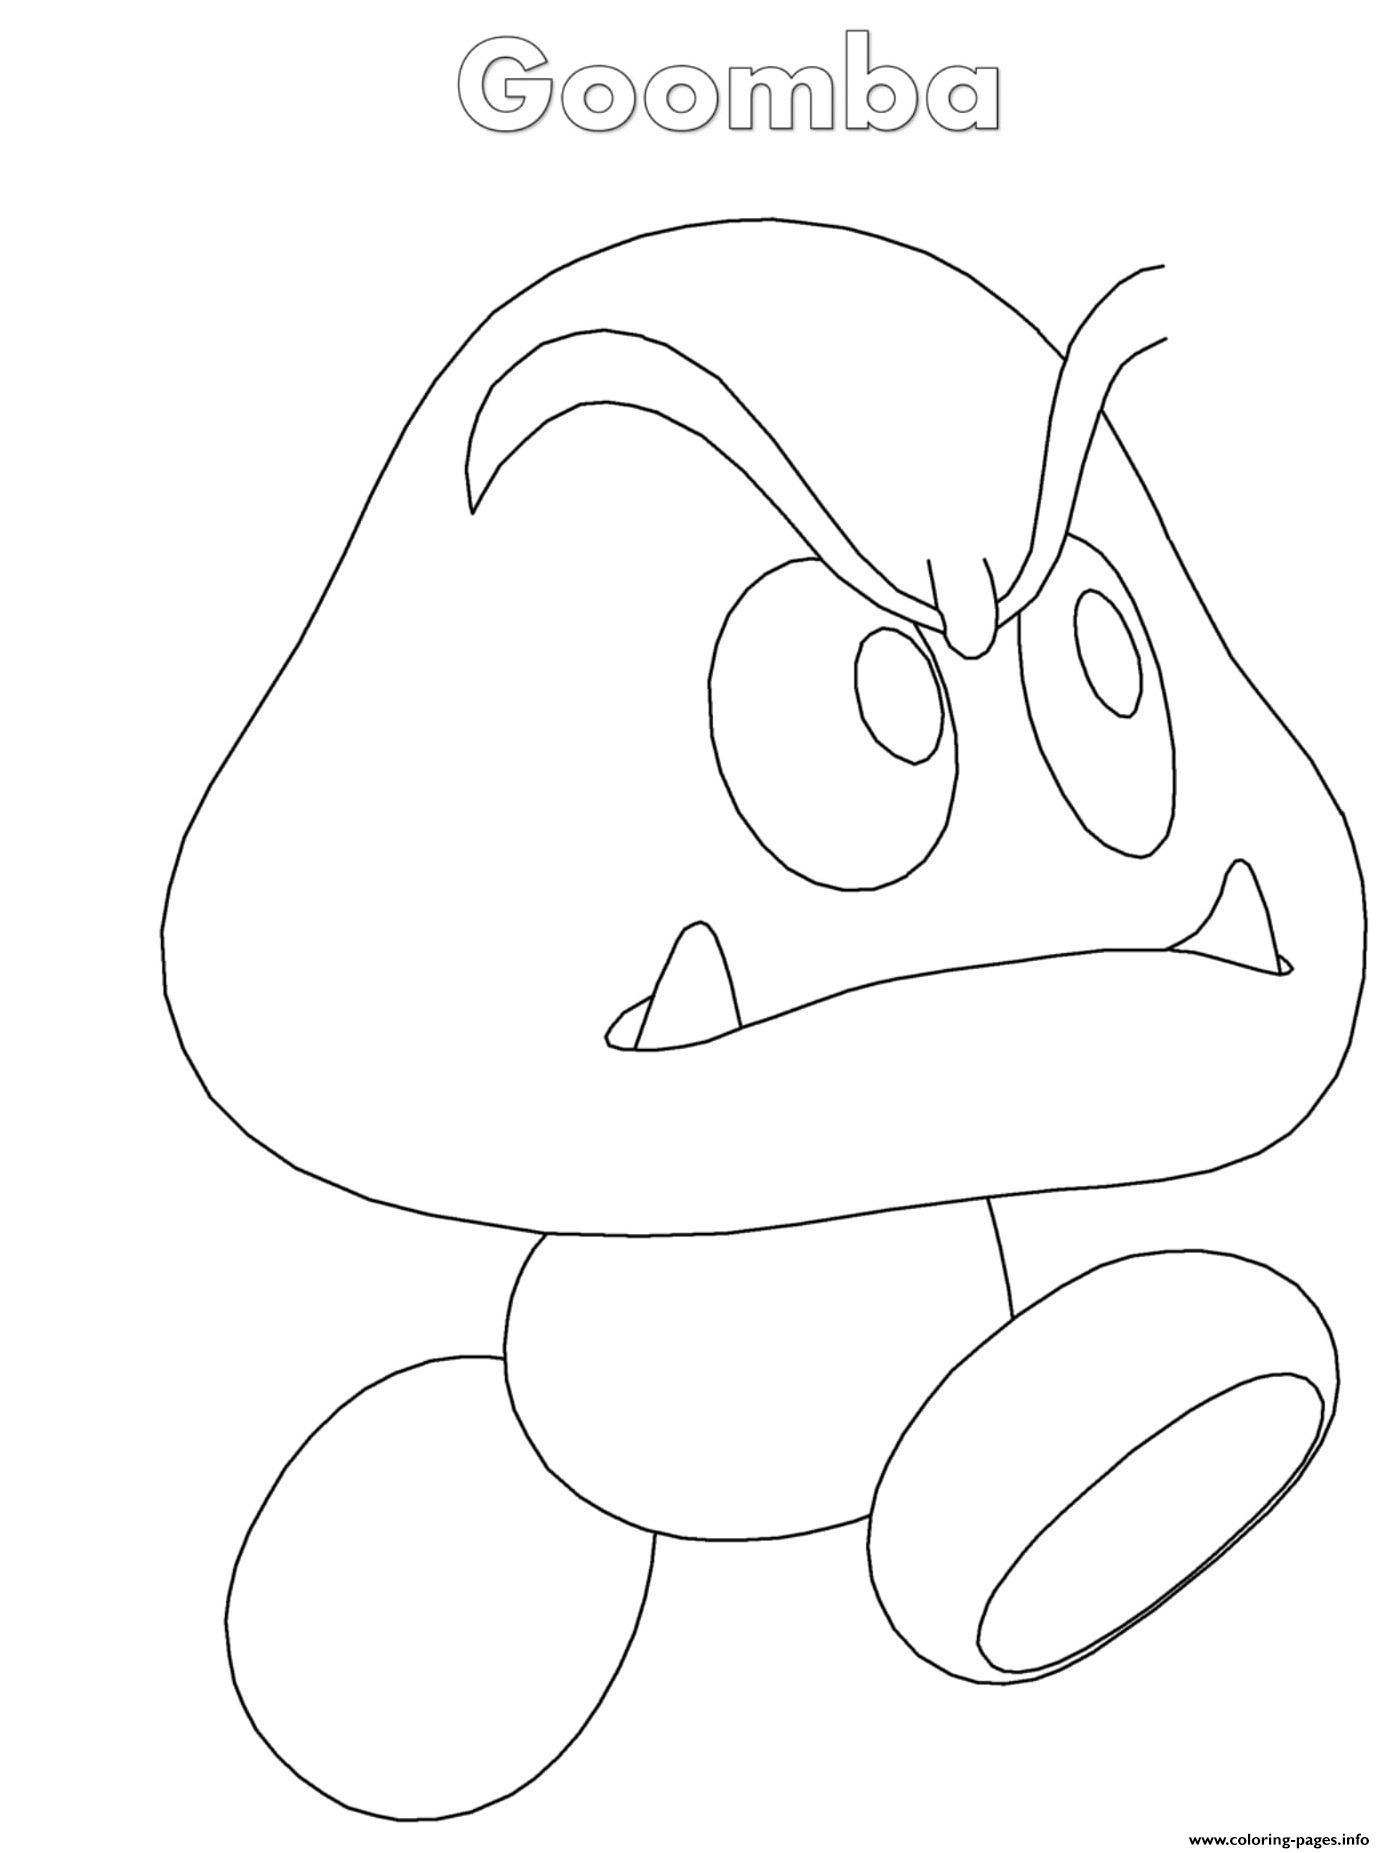 coloring : Nintendo Coloring Pages Best Of Goomba Nintendo Coloring Pages  Printable Nintendo Coloring Pages ~ queens